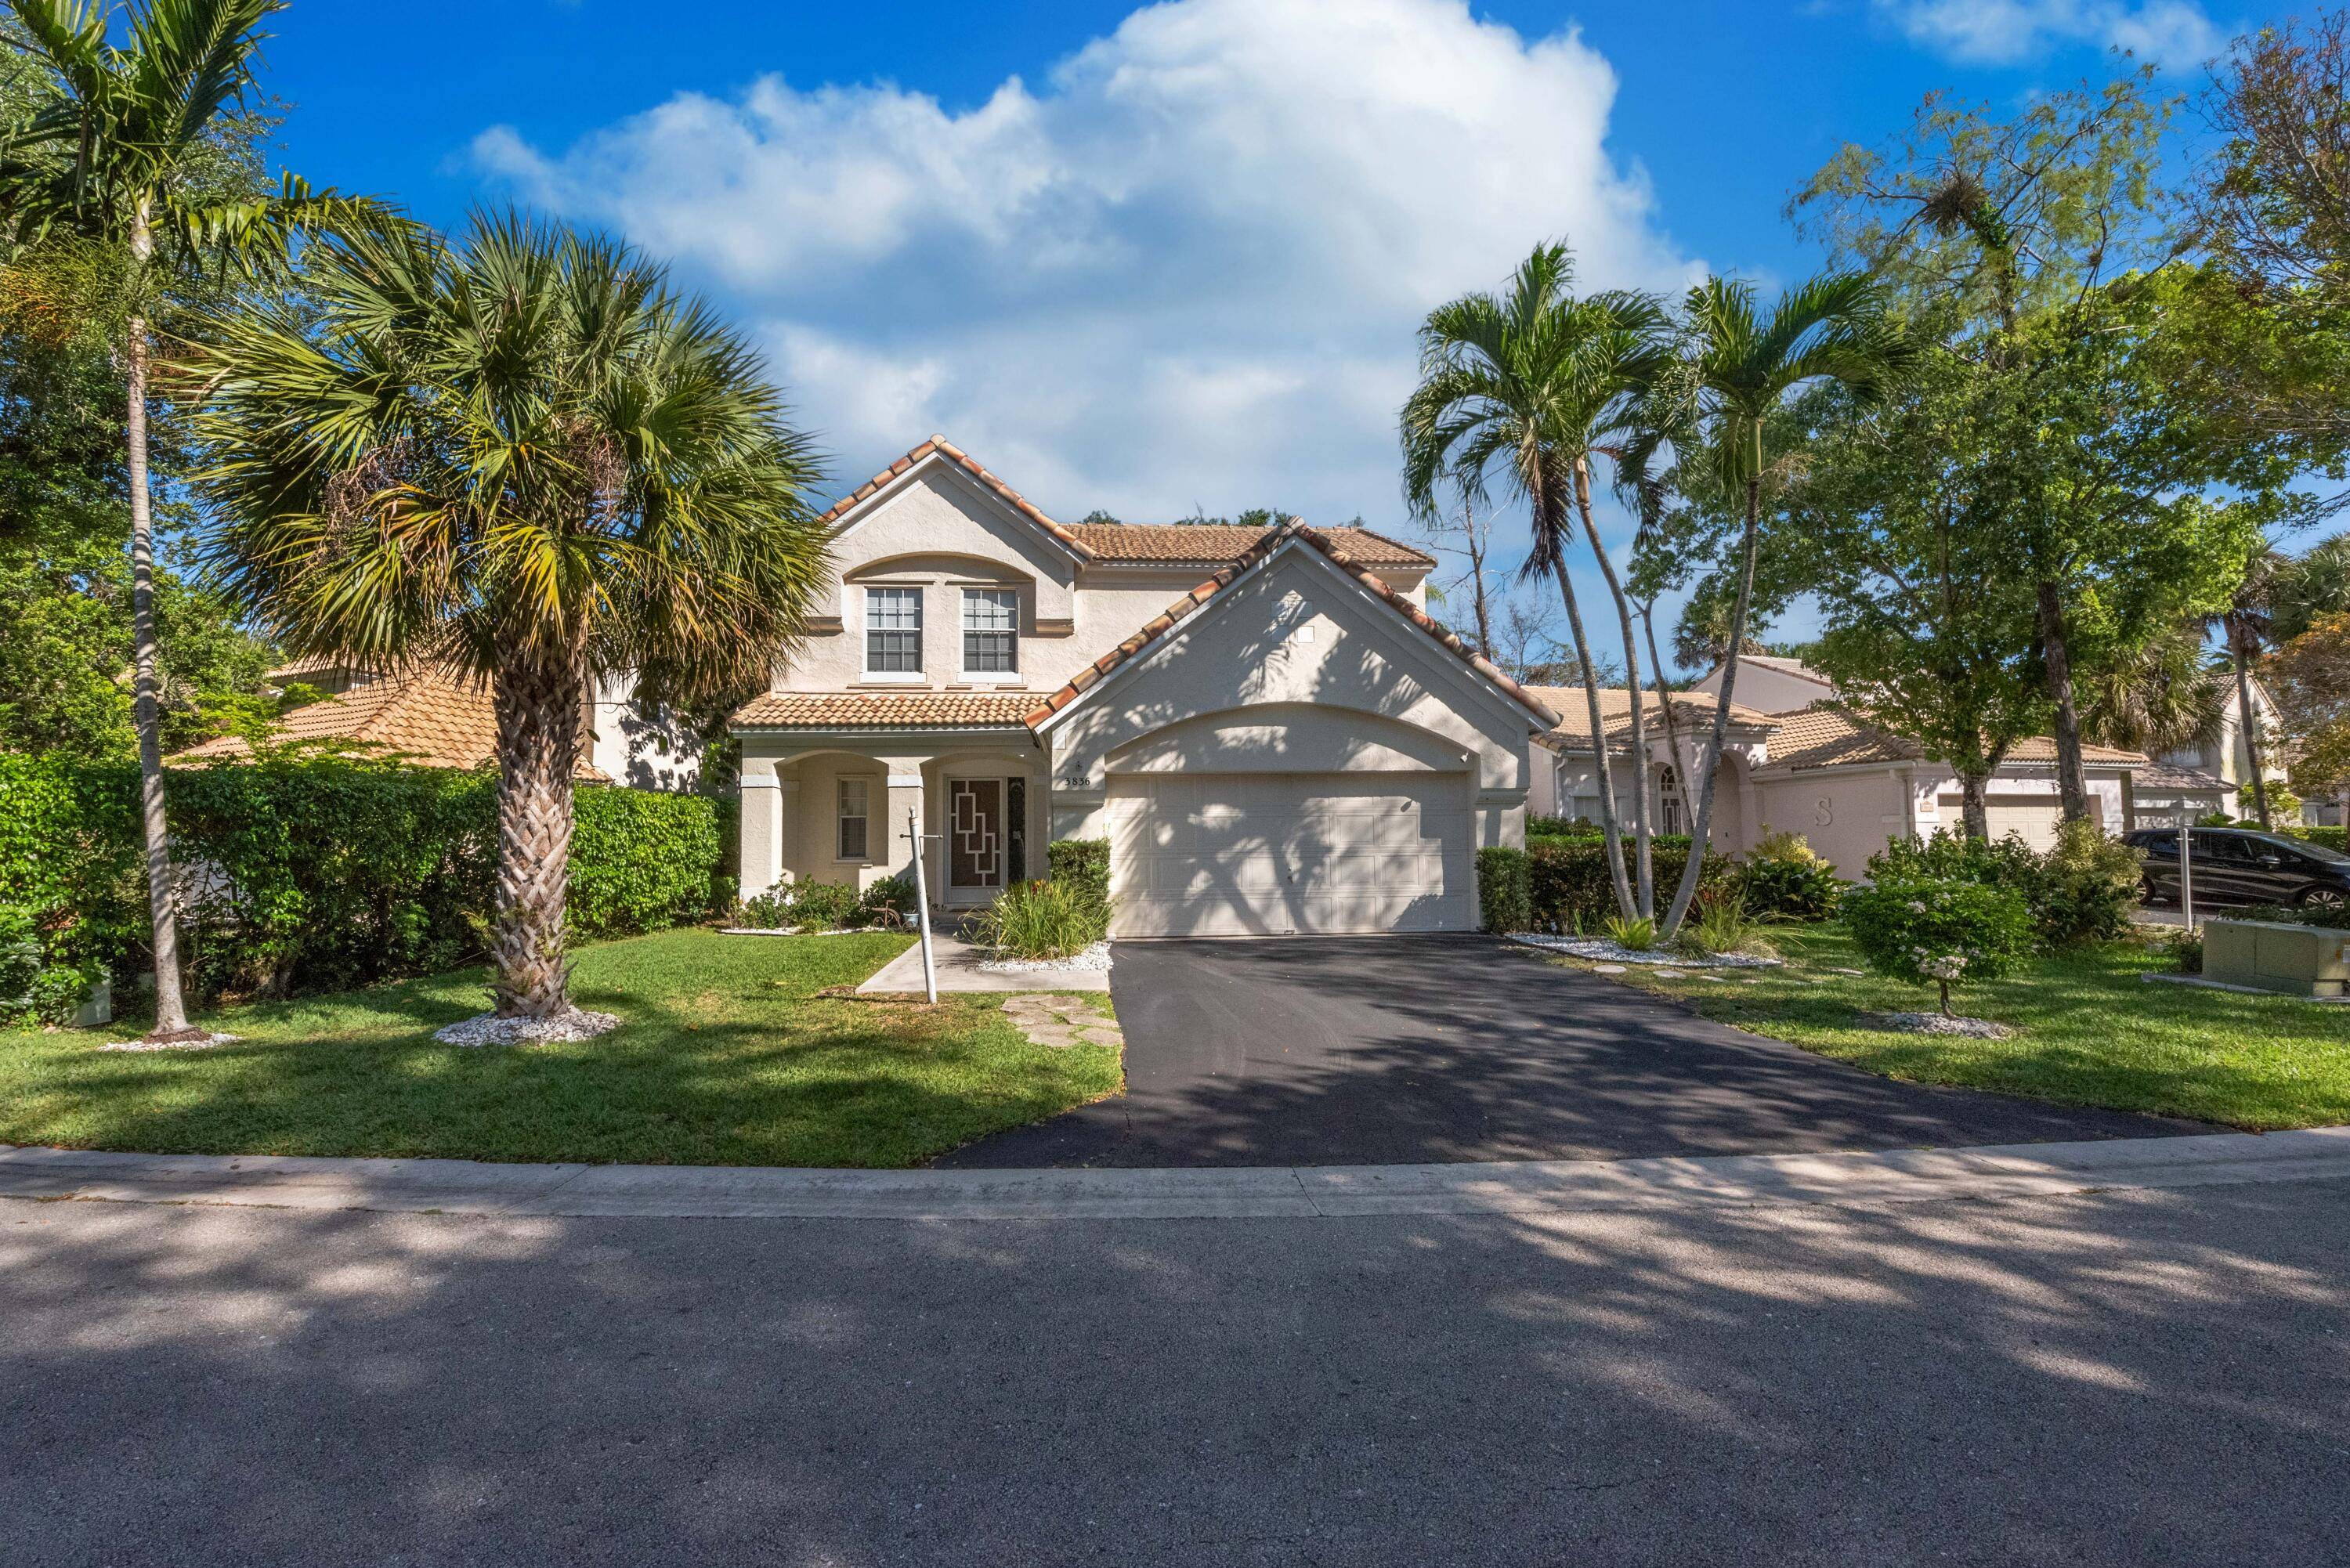 Introducing a stunning single family home nestled in The Preserve's serene subtropical forest.